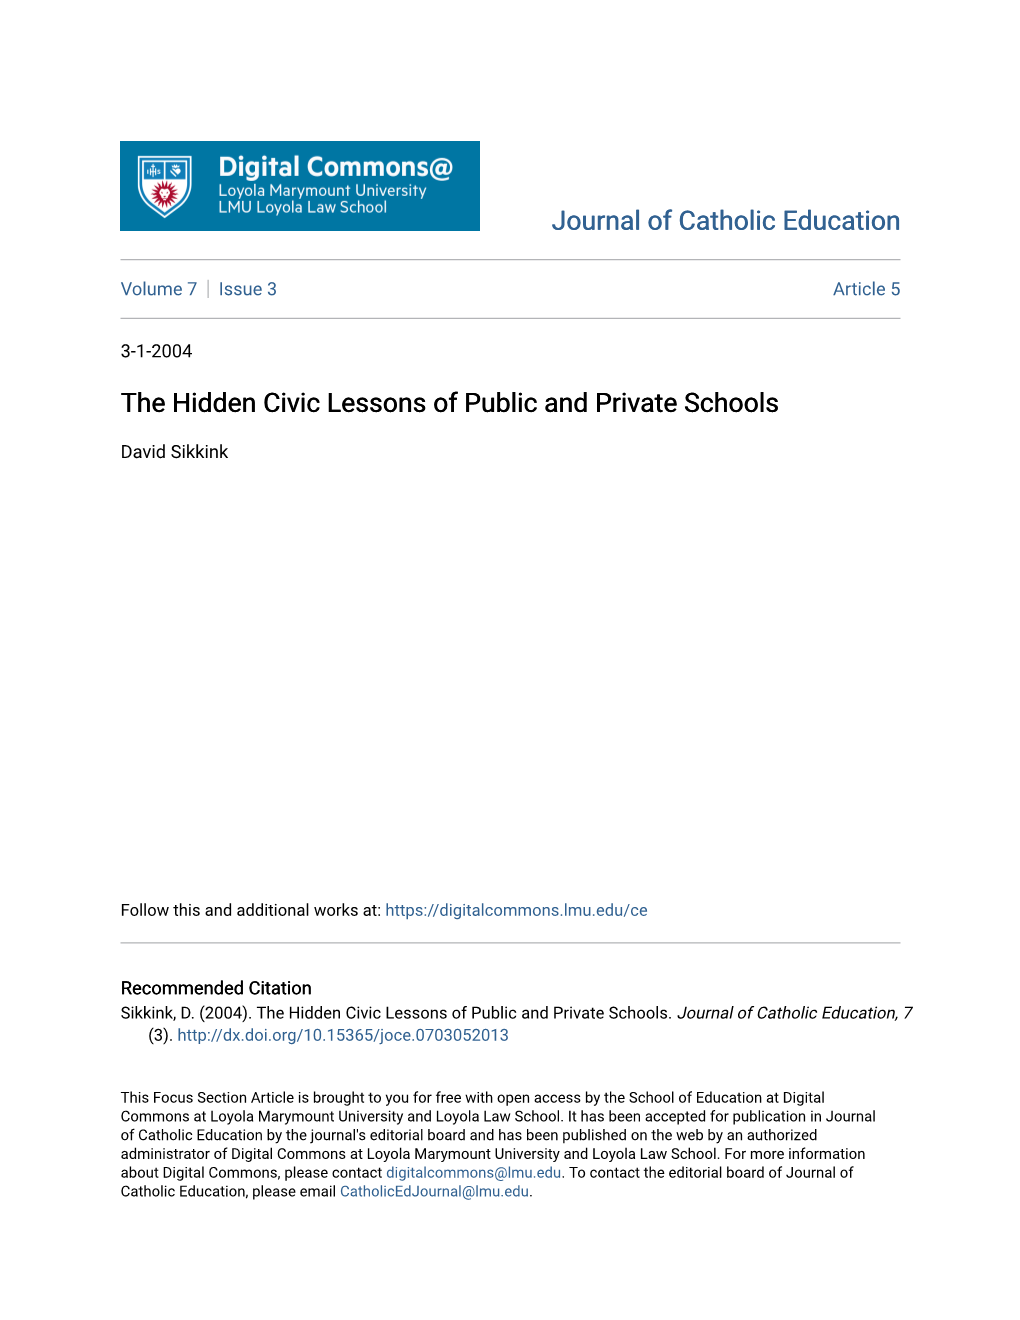 The Hidden Civic Lessons of Public and Private Schools